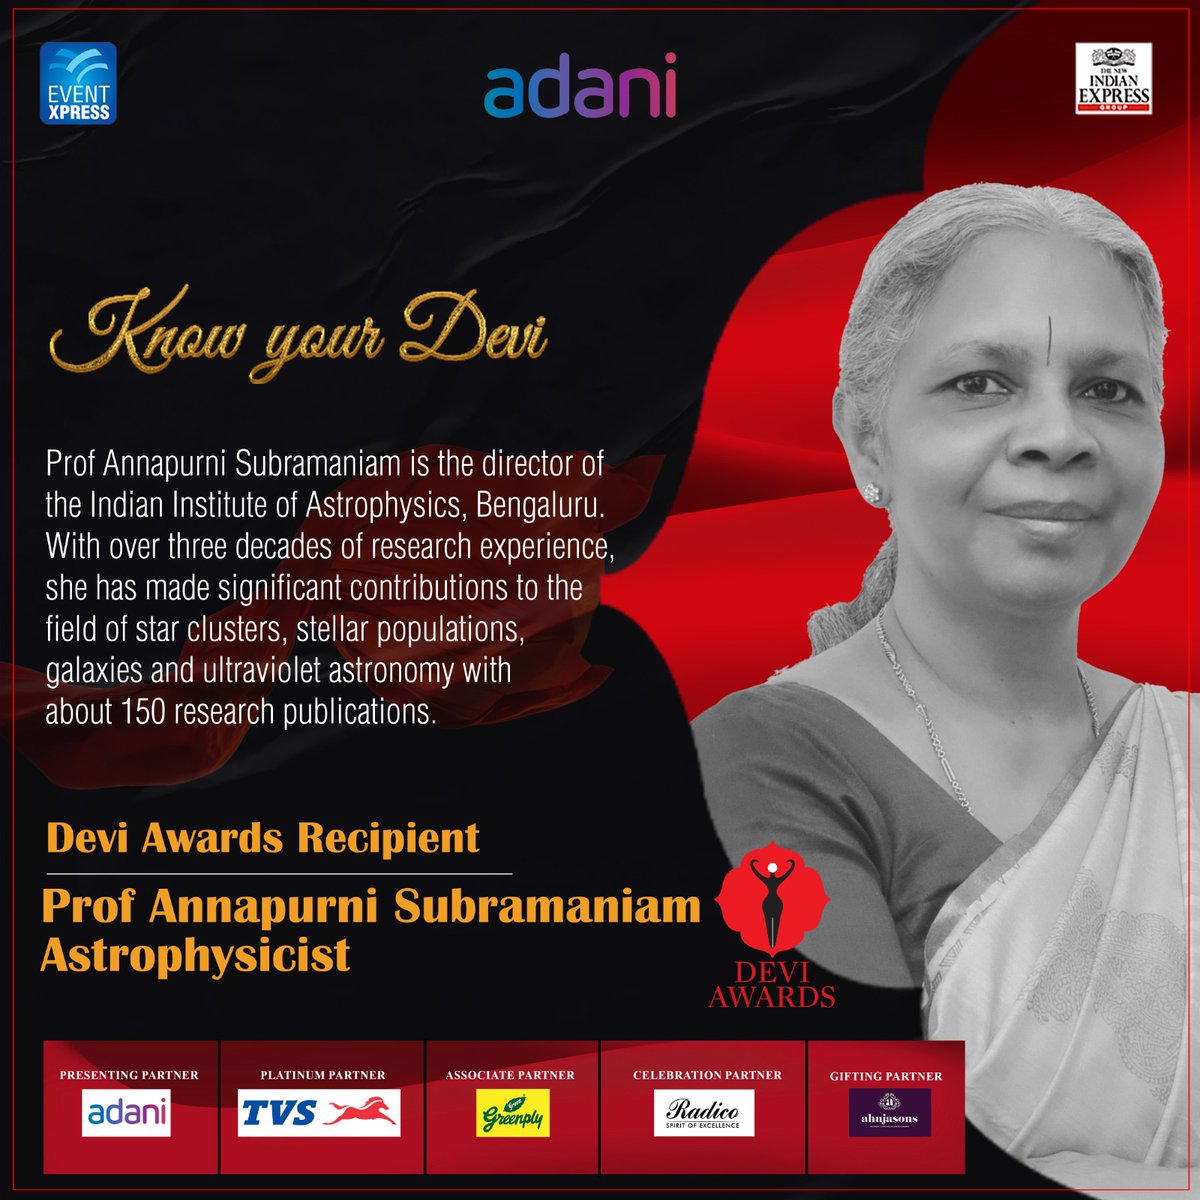 #KnowYourDevi

Our Devi @fiddlingstars was involved in two major projects as a calibration scientist for the UV Imaging Telescope onboard India’s first space observatory, ASTROSAT.

#DeviAwards #DeviAwardsChennai 

@NewIndianXpress @Eventxpress @PrabhuChawla @AdaniOnline